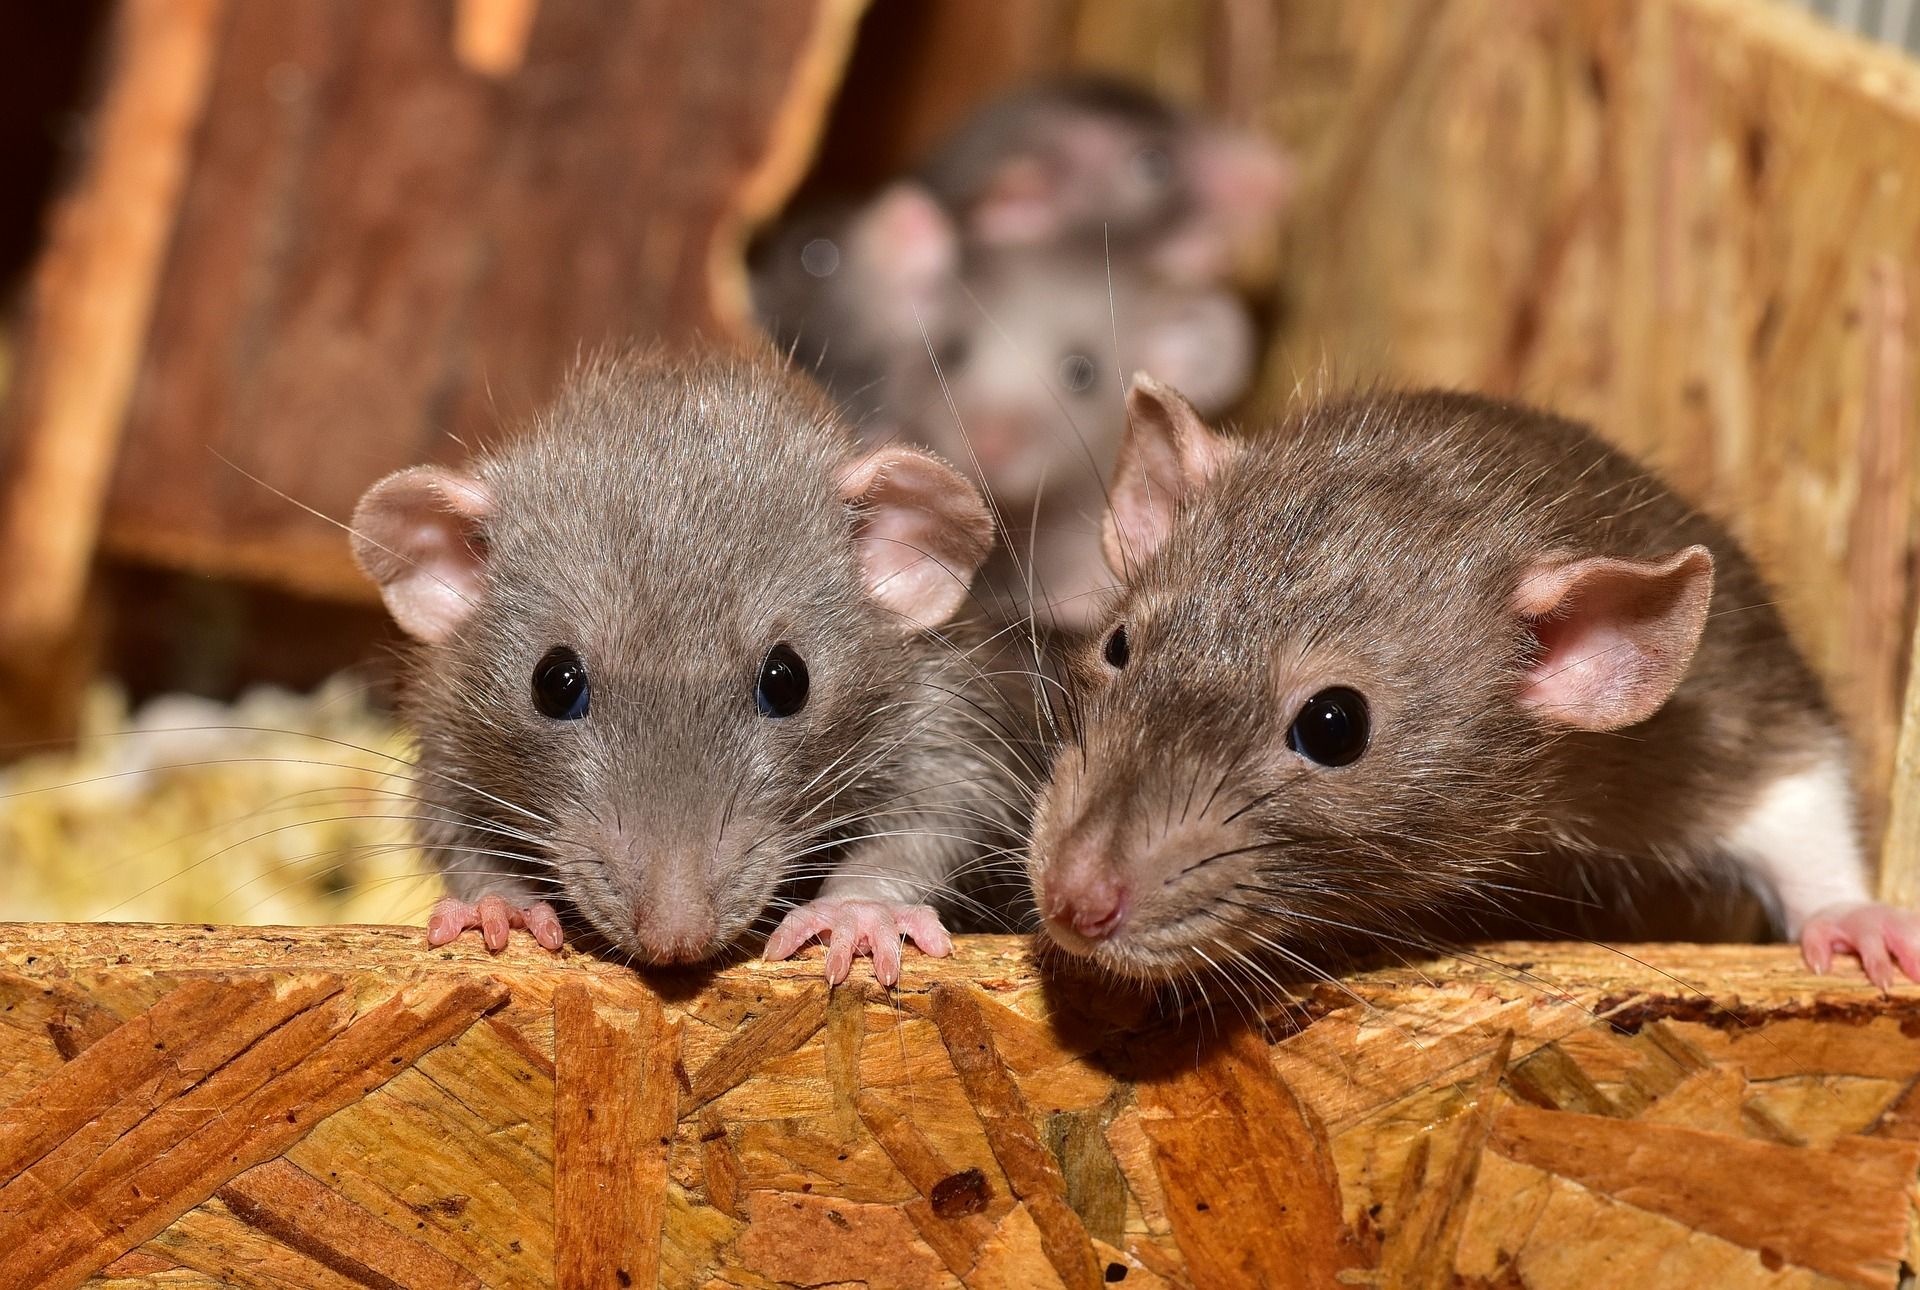 Lassa fever: One dead in UK of Ebola-like virus, all you need to know